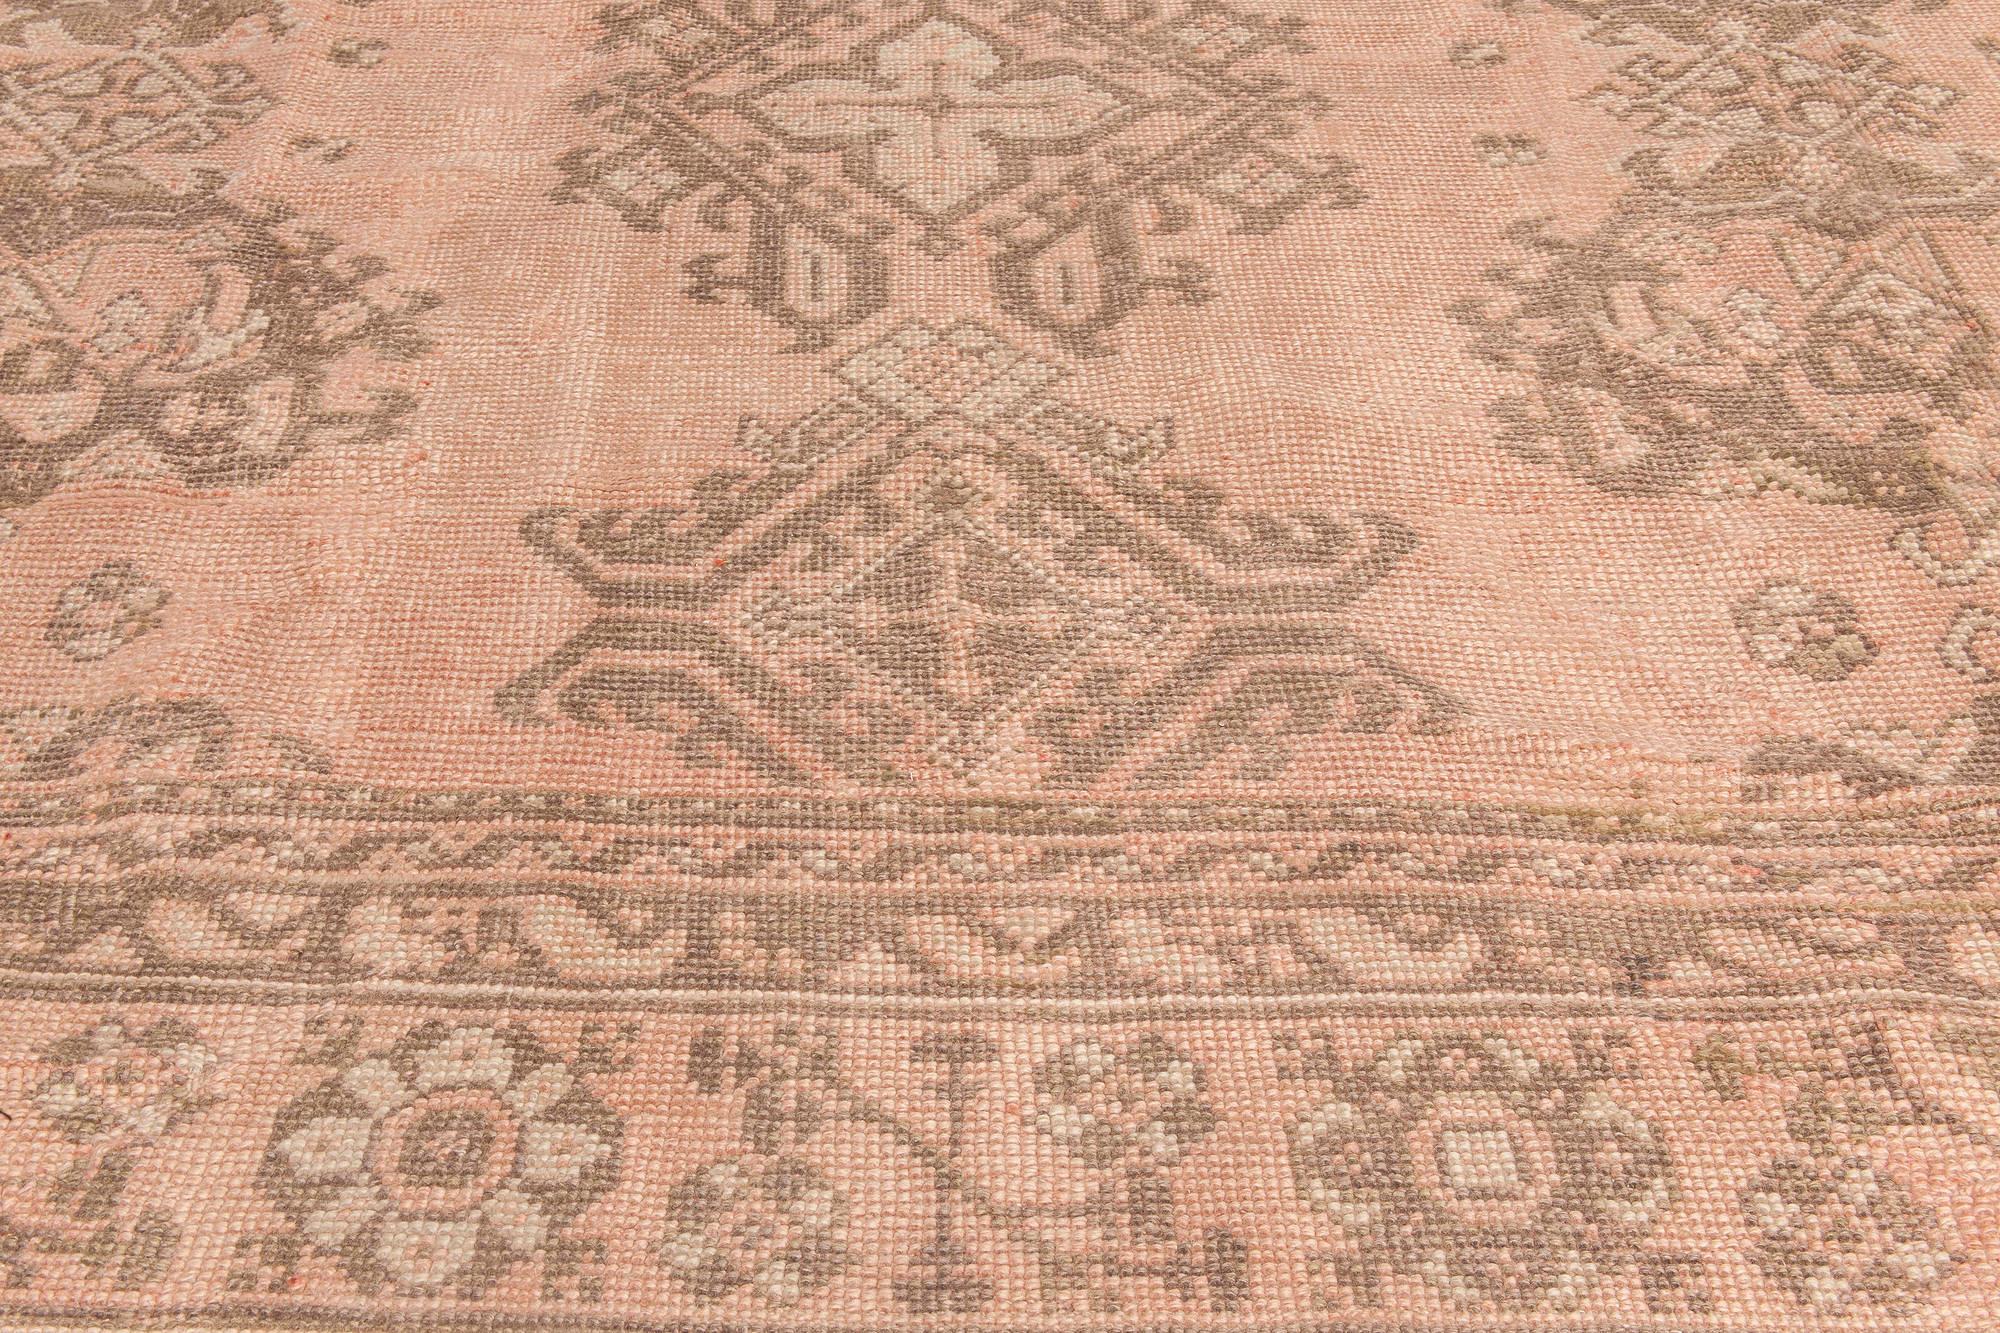 Hand-Knotted Early 20th Century Turkish Oushak Handmade Wool Rug For Sale